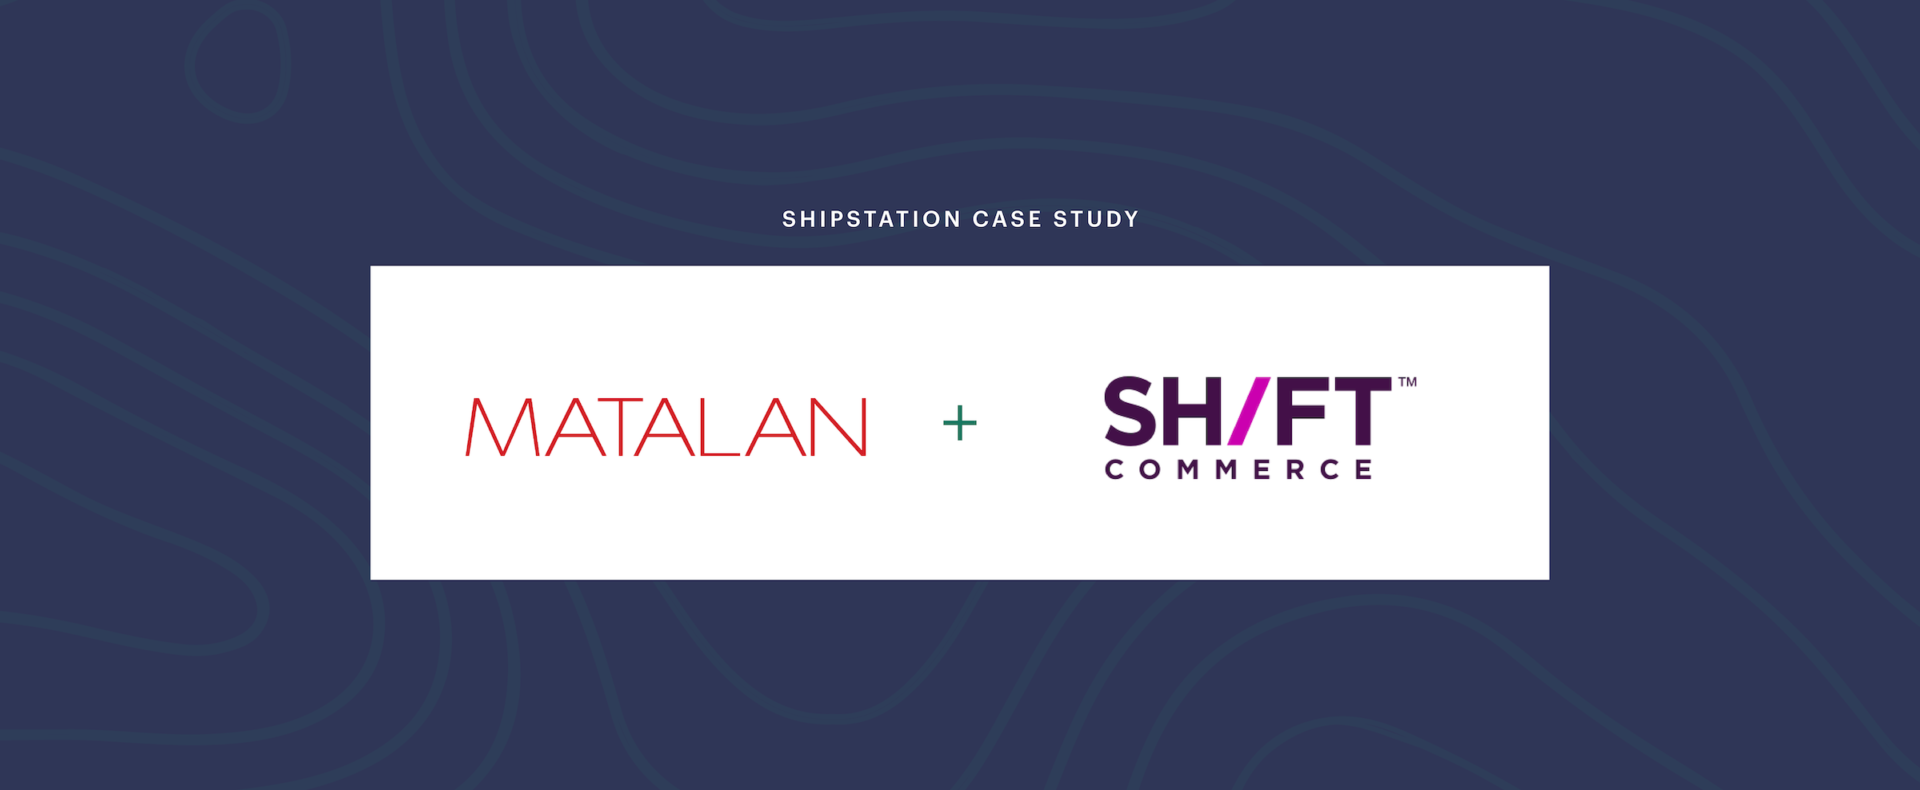 Matalan UK and SHIFT Commerce logos with plus sign in between to indicate partnership